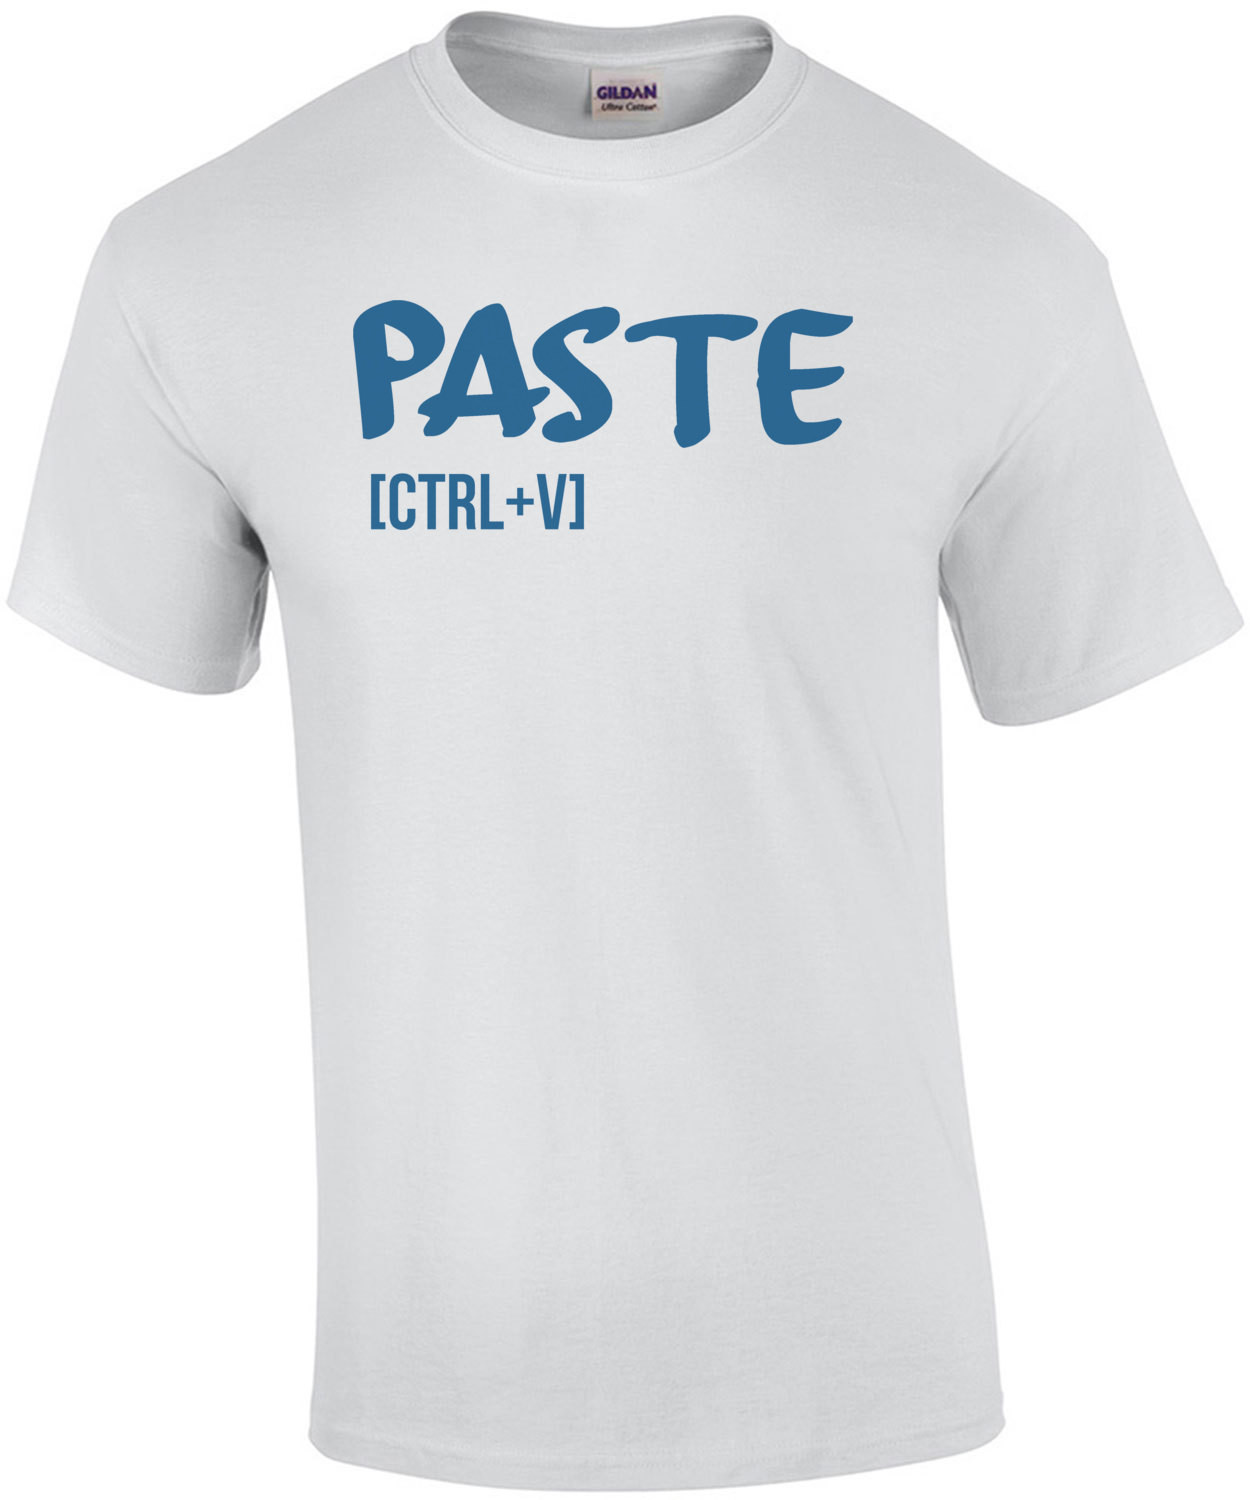 Copy and Paste - PASTE - Cute Funny Parent and Daughter/Son T-Shirt